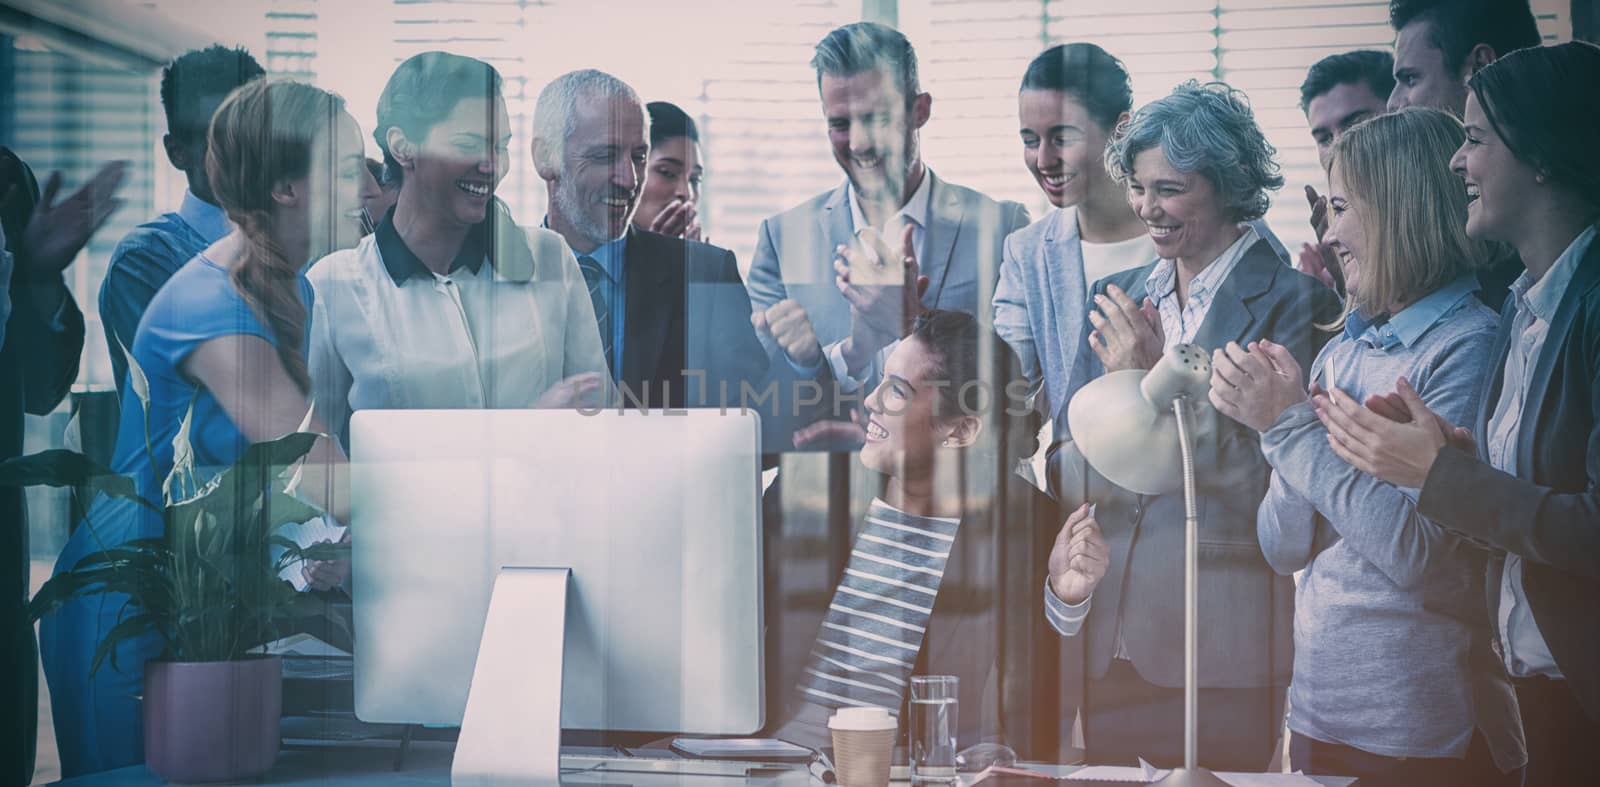 Business people applauding their colleague presentation in office seen through glass